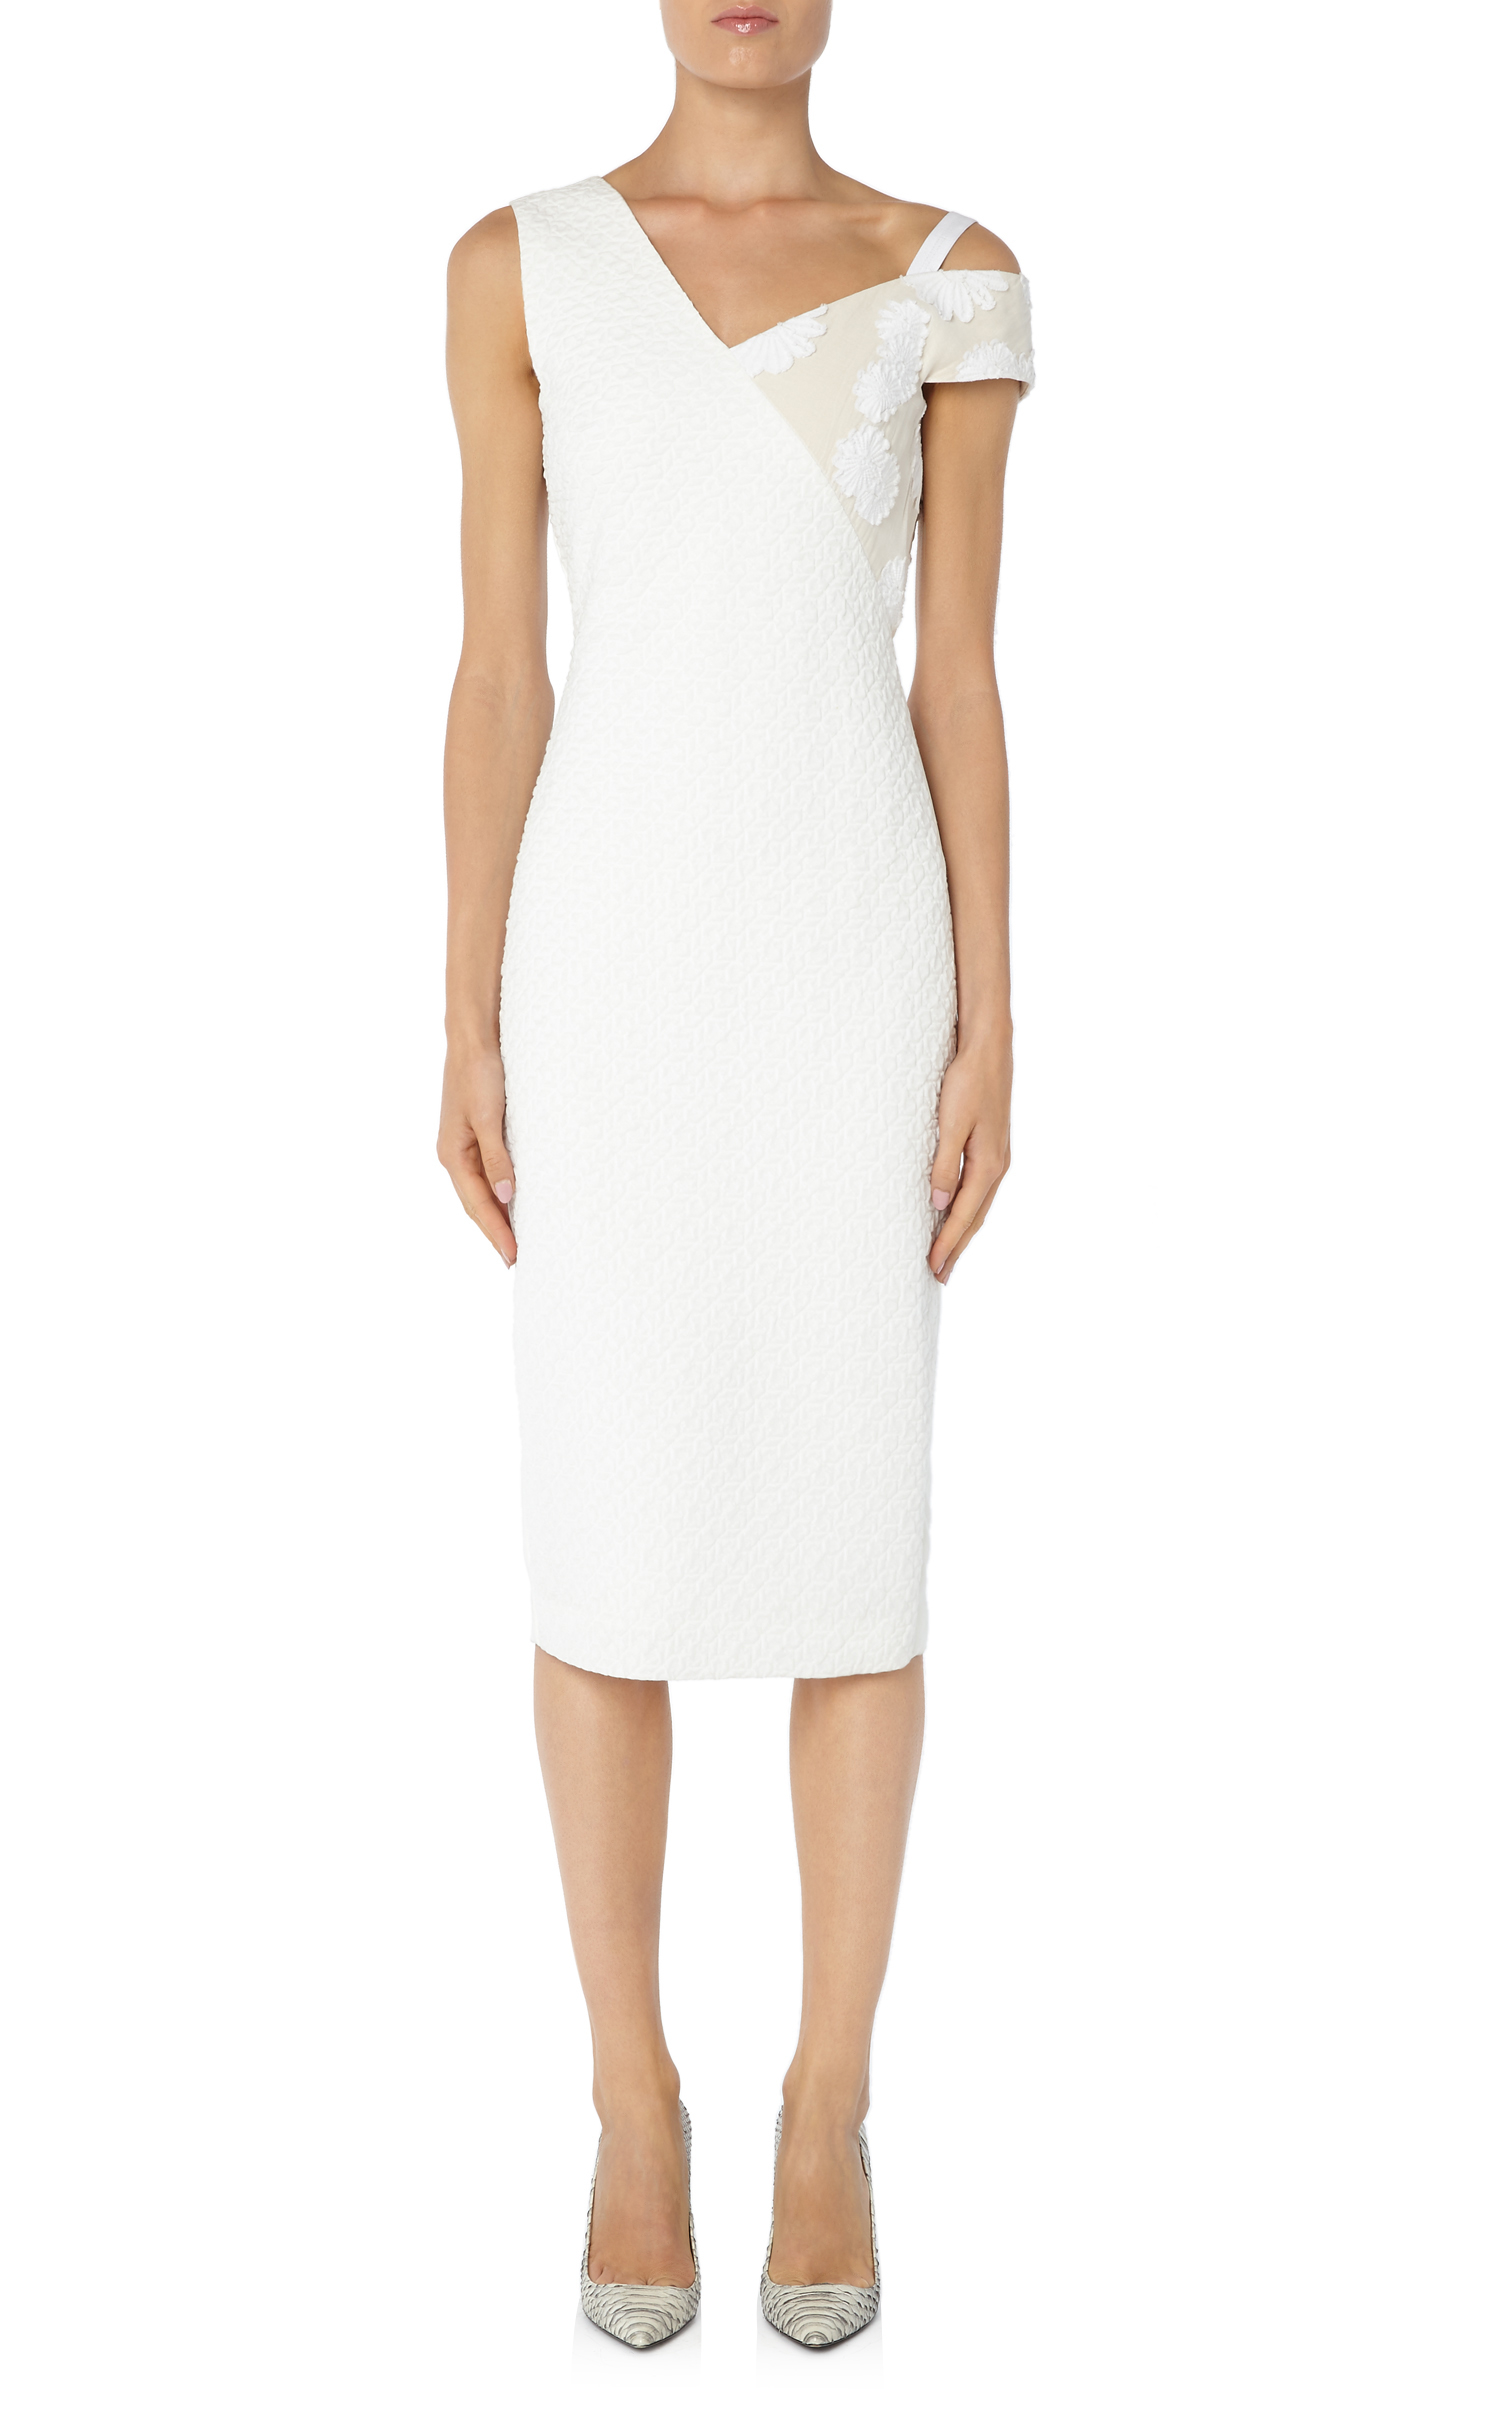 Lyst - Roland mouret Camley Dress in White